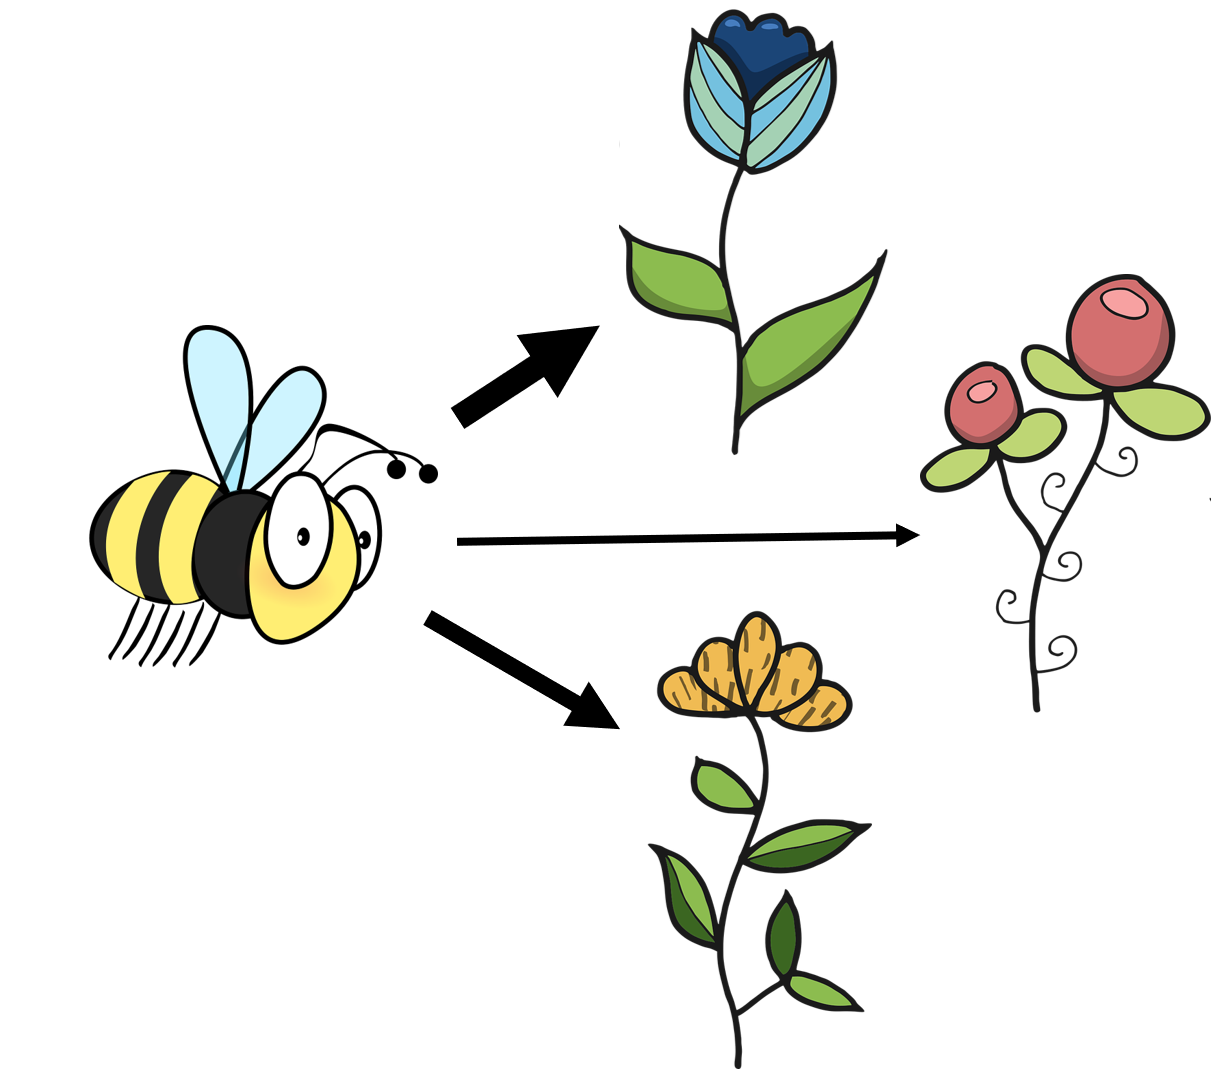 The bee in this example prefers visiting the blue flower, while visiting the red and yellow flowers less often. The interaction strength between the bee and the blue flower is thus stronger than the interaction strength between the bee and the red and yellow flowers as indicated by the weight of the arrows.